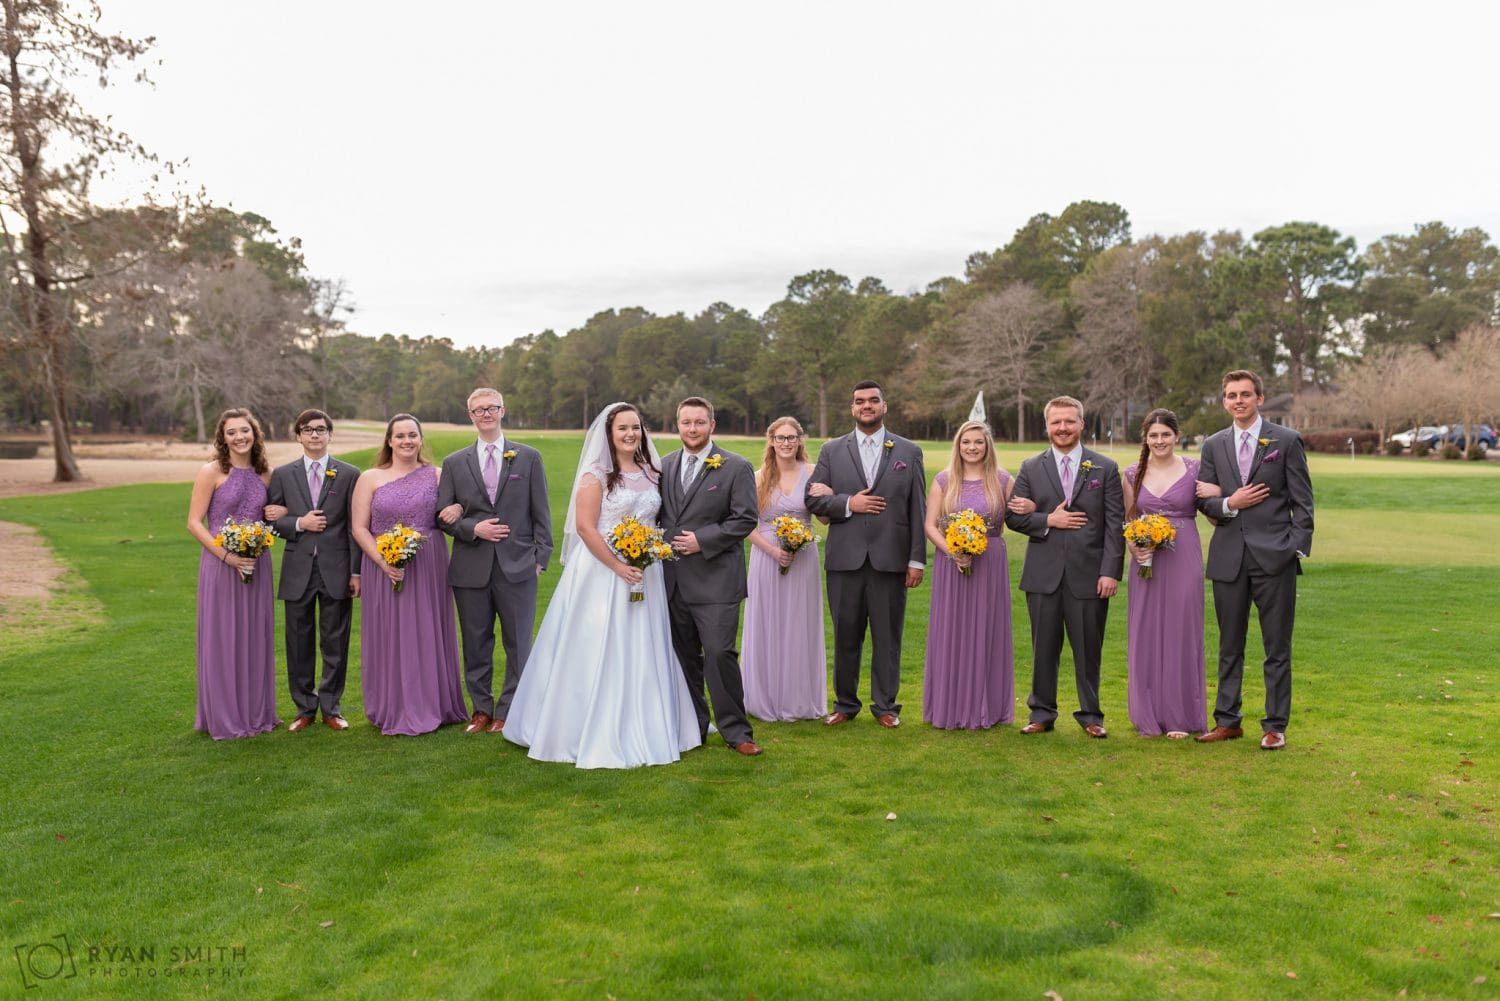 Bridesmaids and groomsmen standing together on the golf course Litchfield Country Club